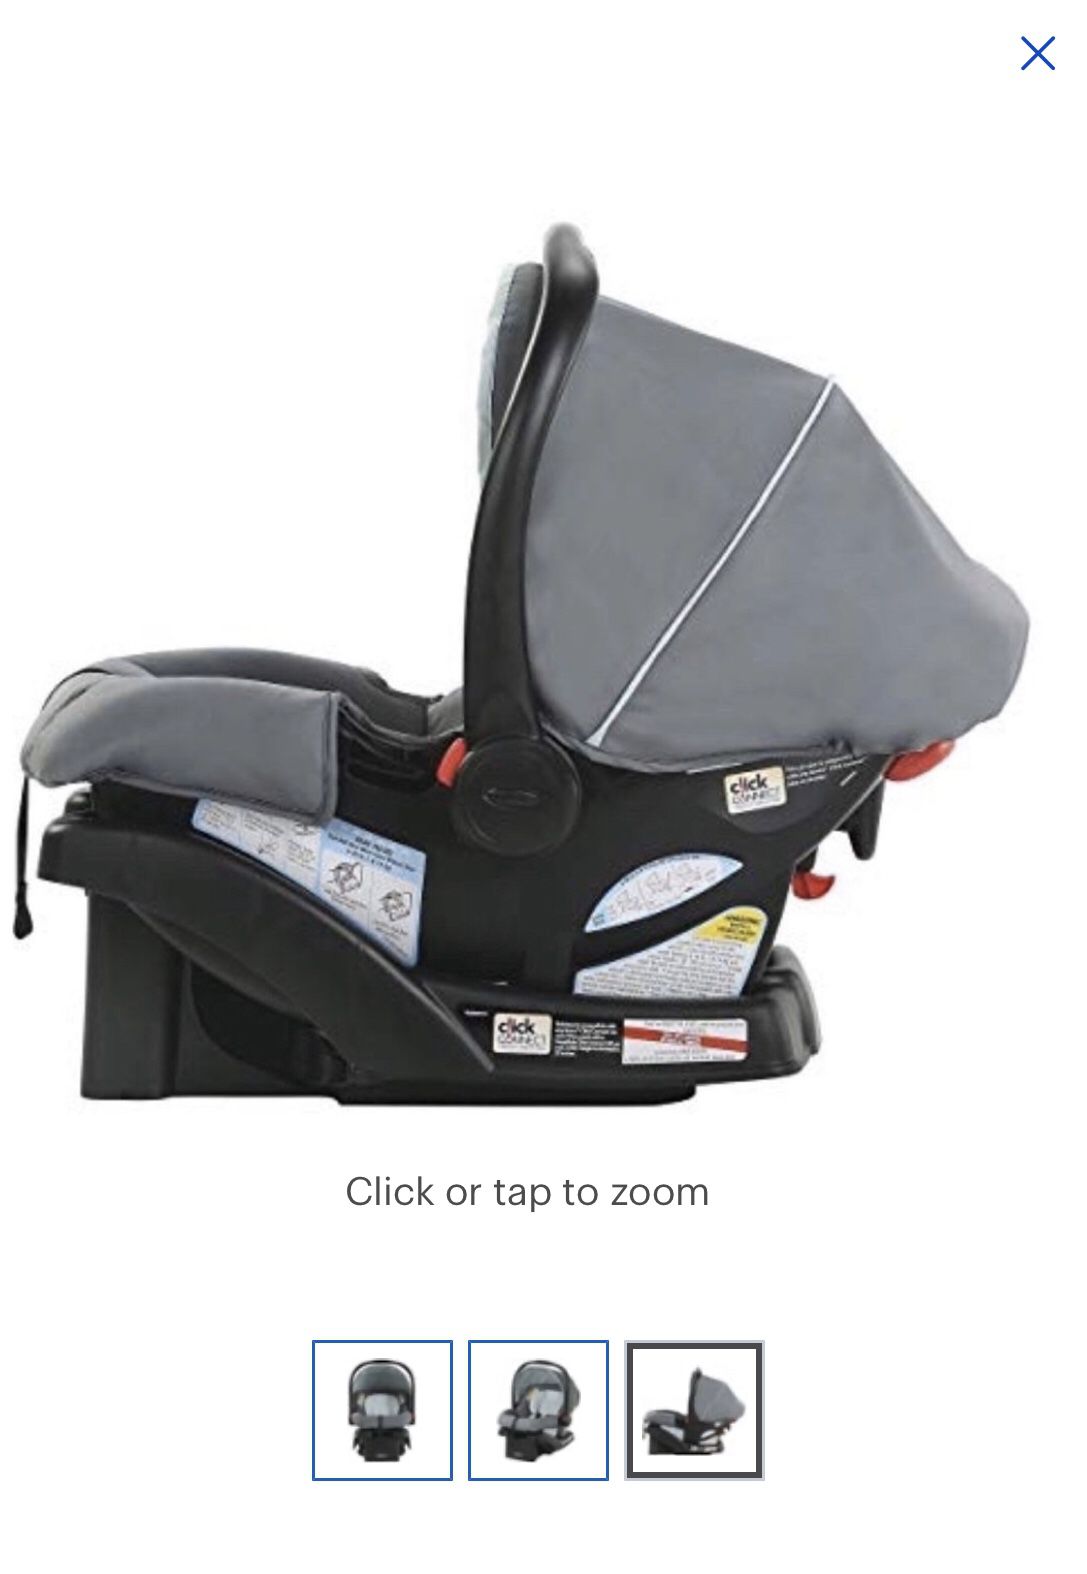 Graco-SnugRide Click Connect 30 Infant Car Seat and Base